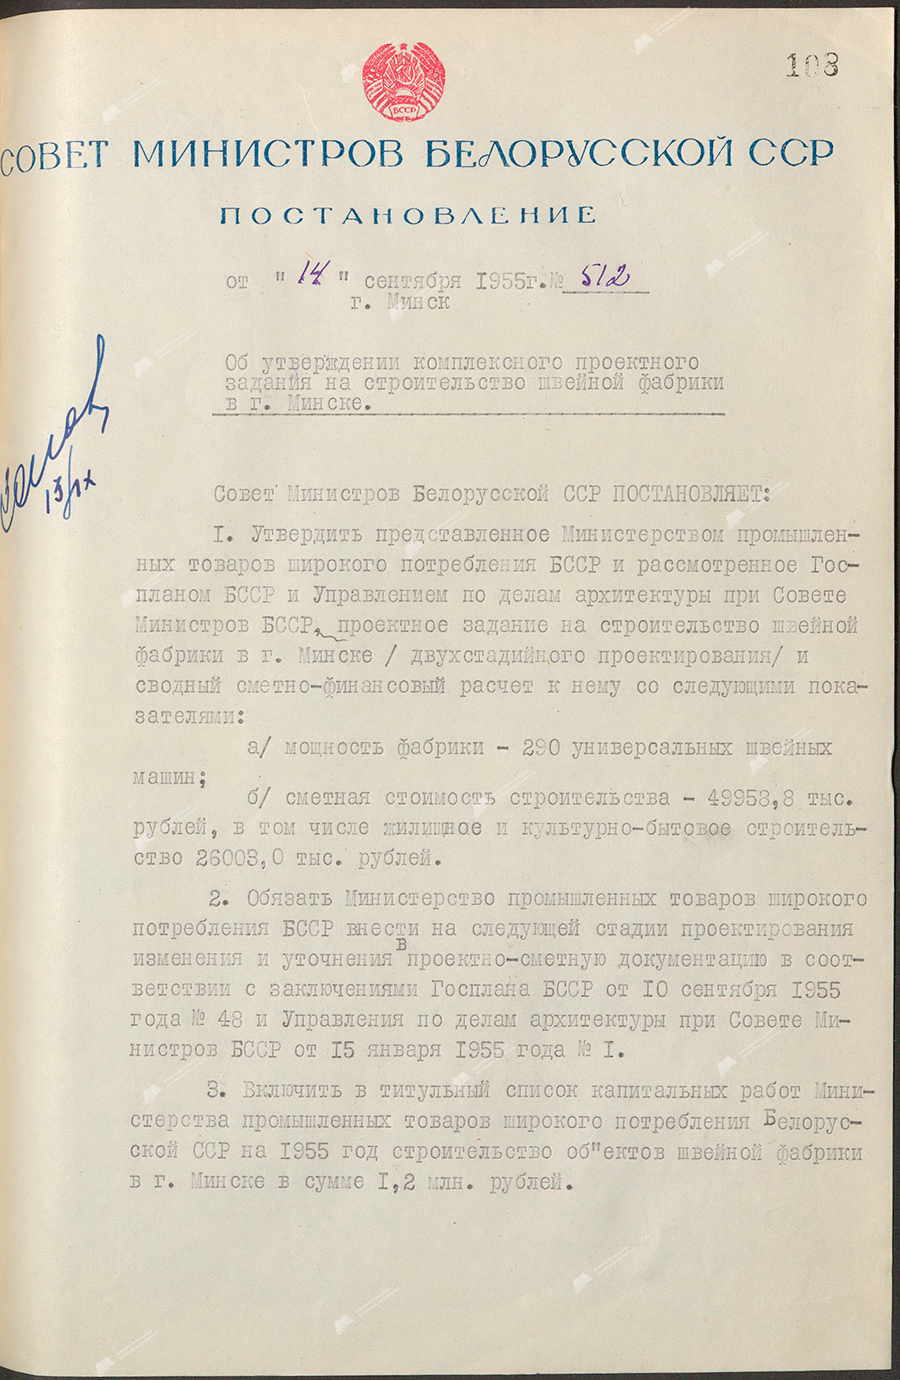 Resolution No. 512 of the Council of Ministers of the Byelorussian SSR «On approval of a comprehensive design assignment for the construction of a garment factory in Minsk»-стр. 0